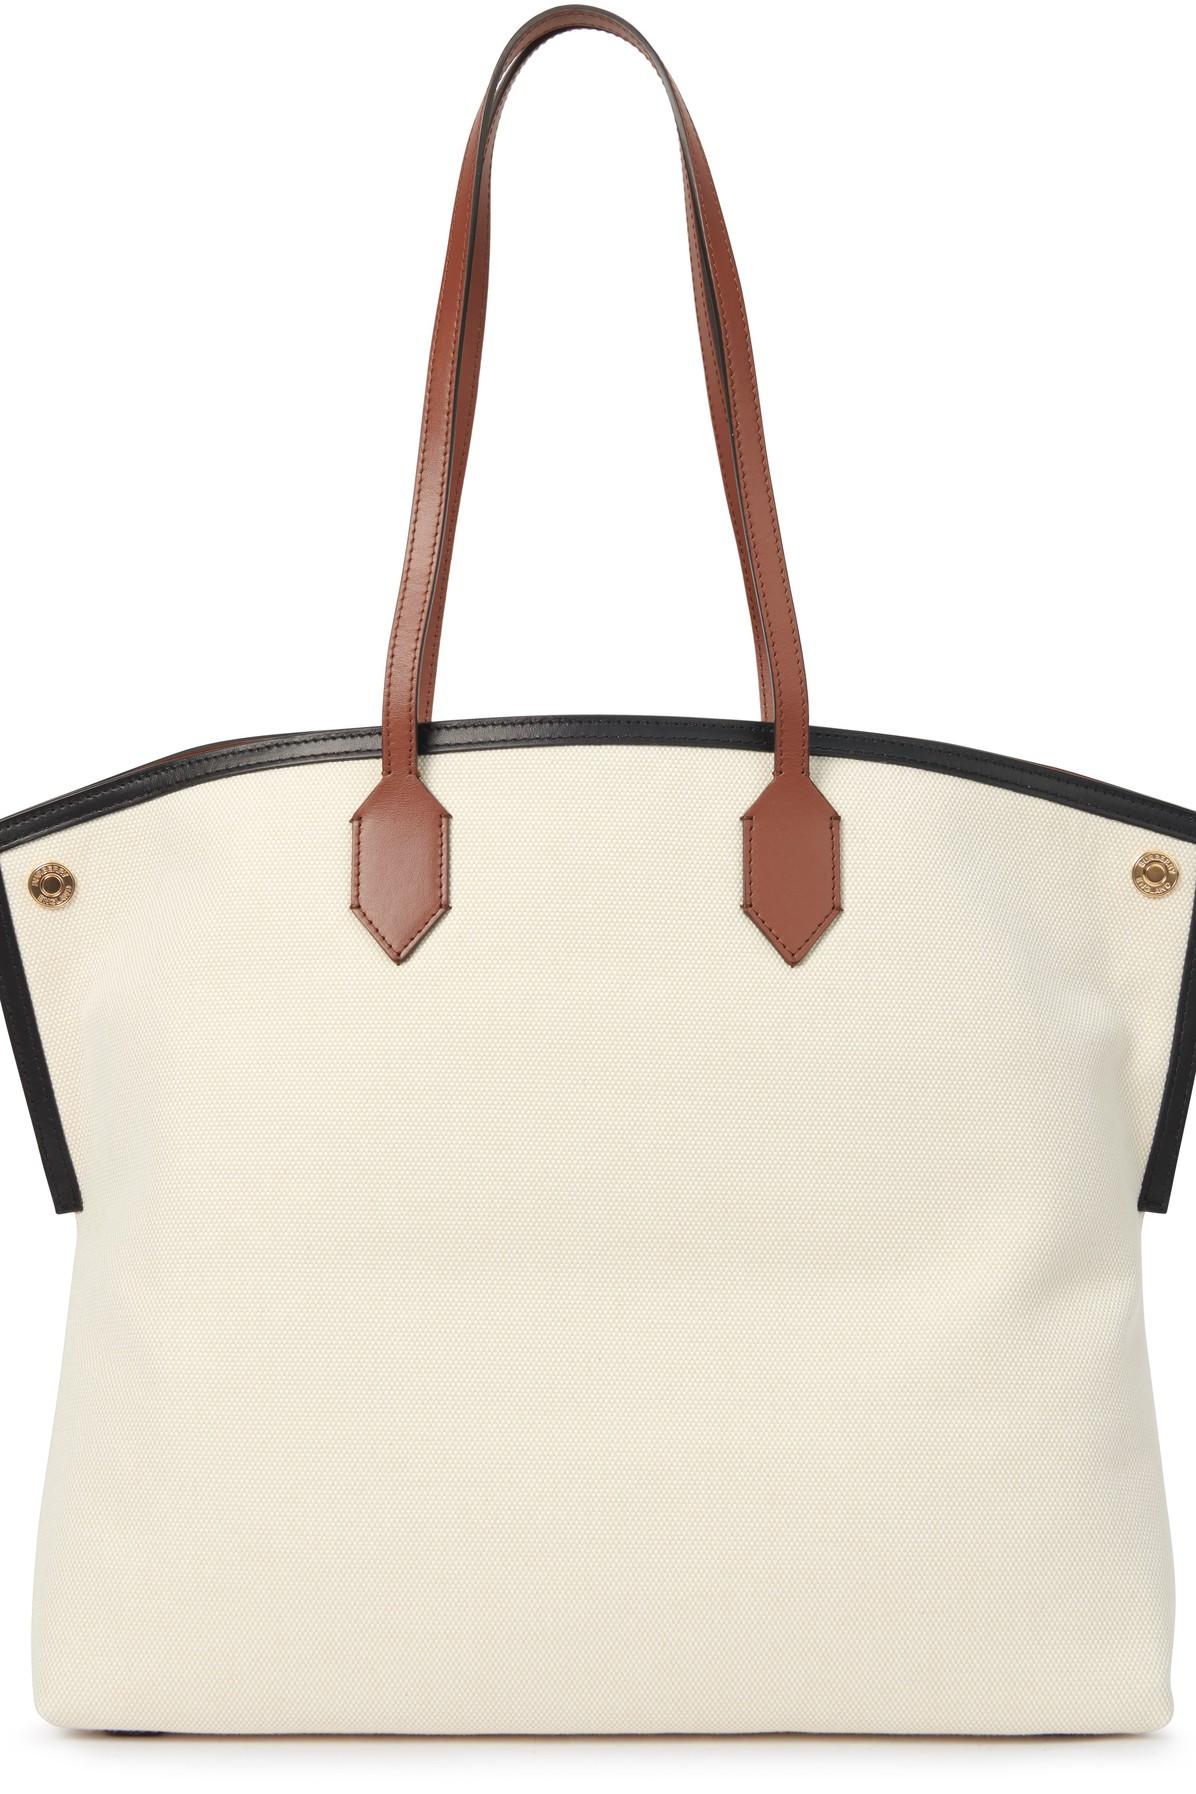 Burberry Large Leather Society Tote in Natural